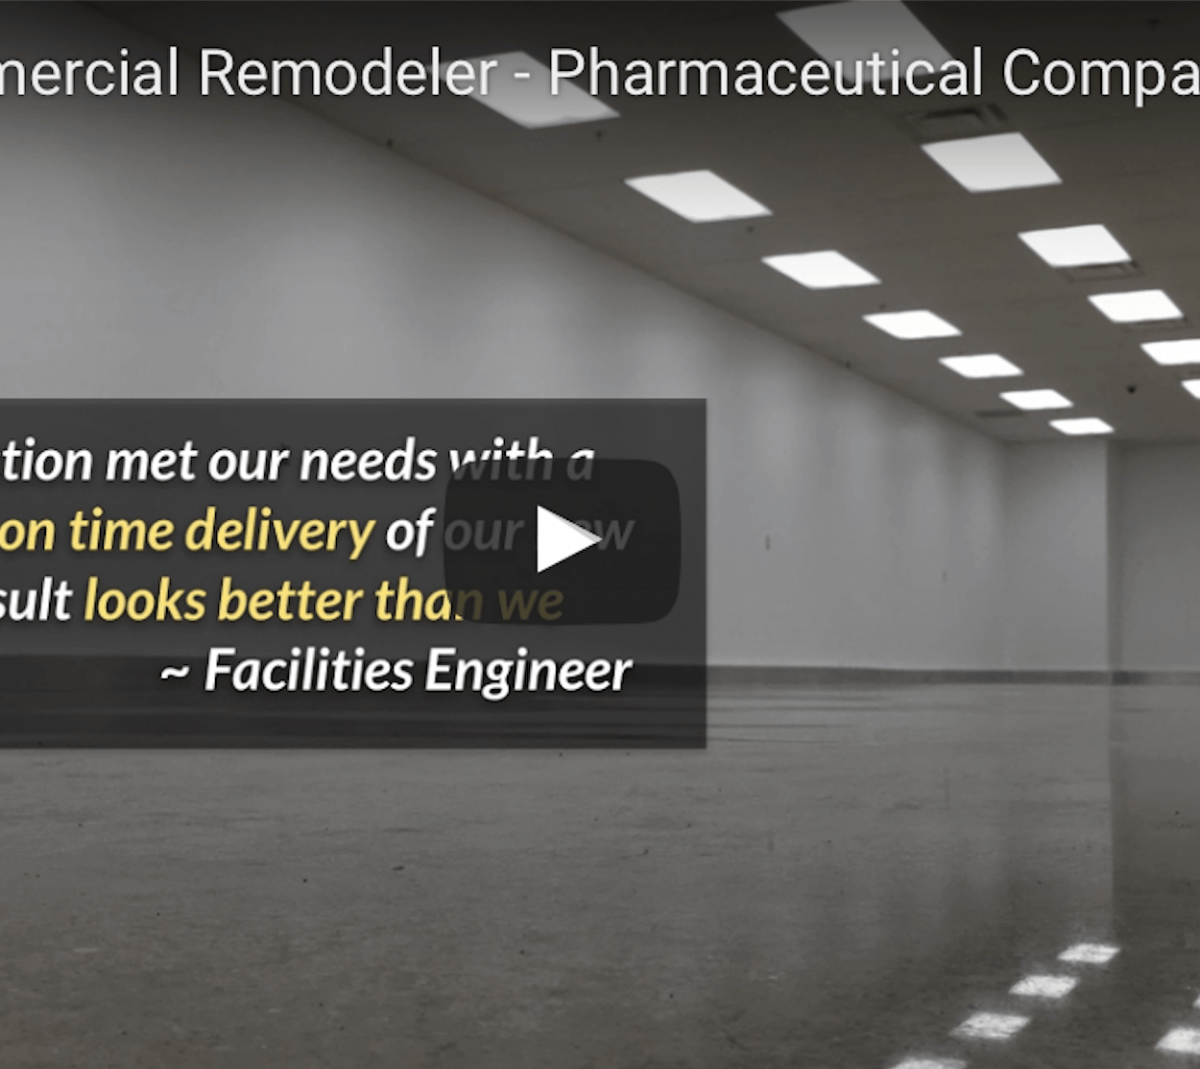 Pharmaceutical Commercial Remodeling – Video